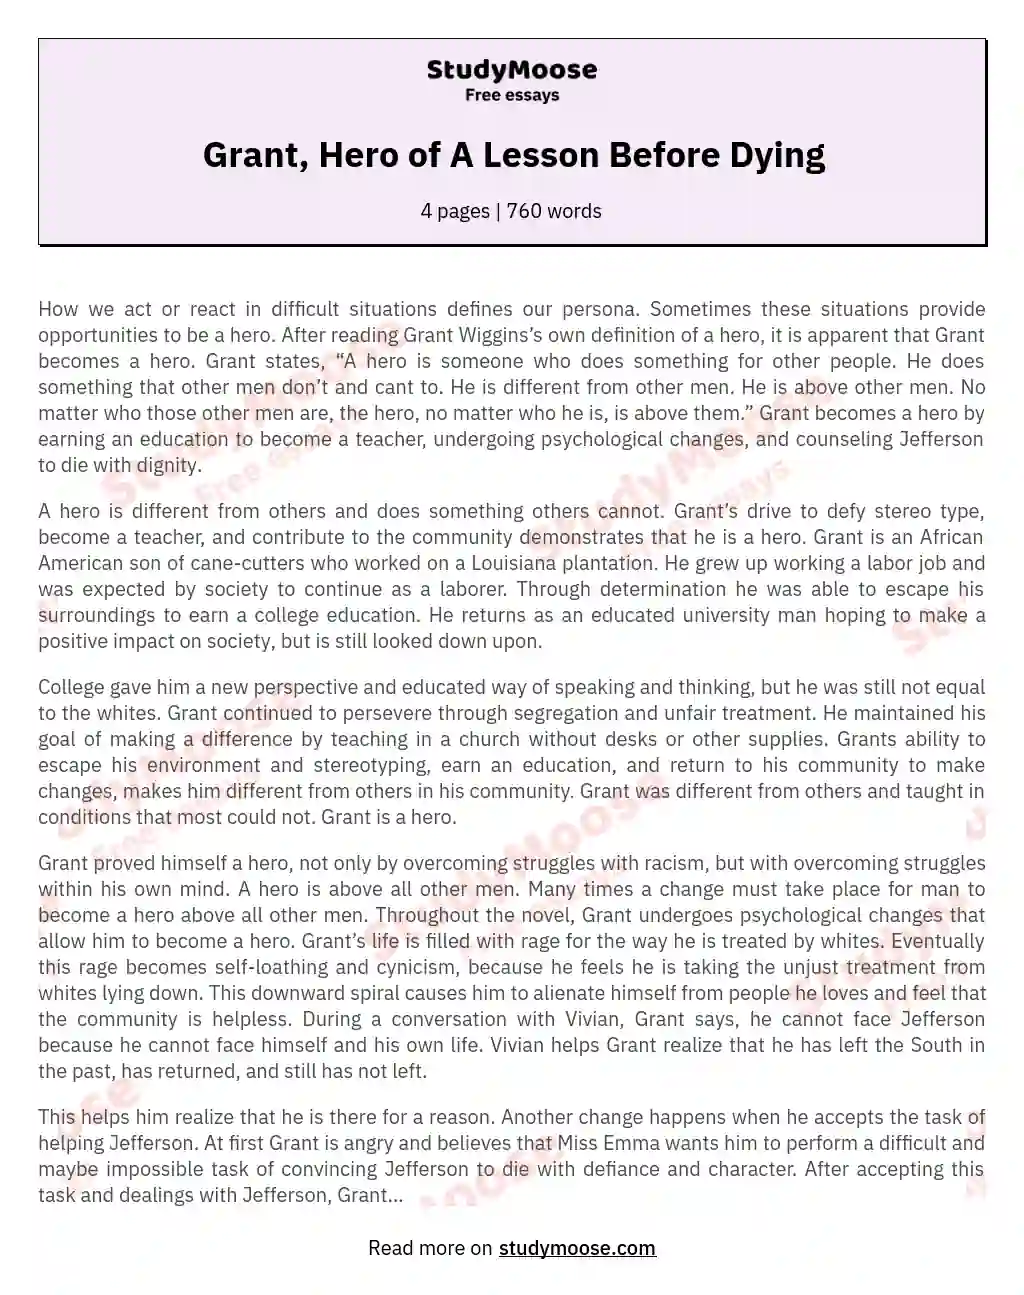 Grant, Hero of A Lesson Before Dying